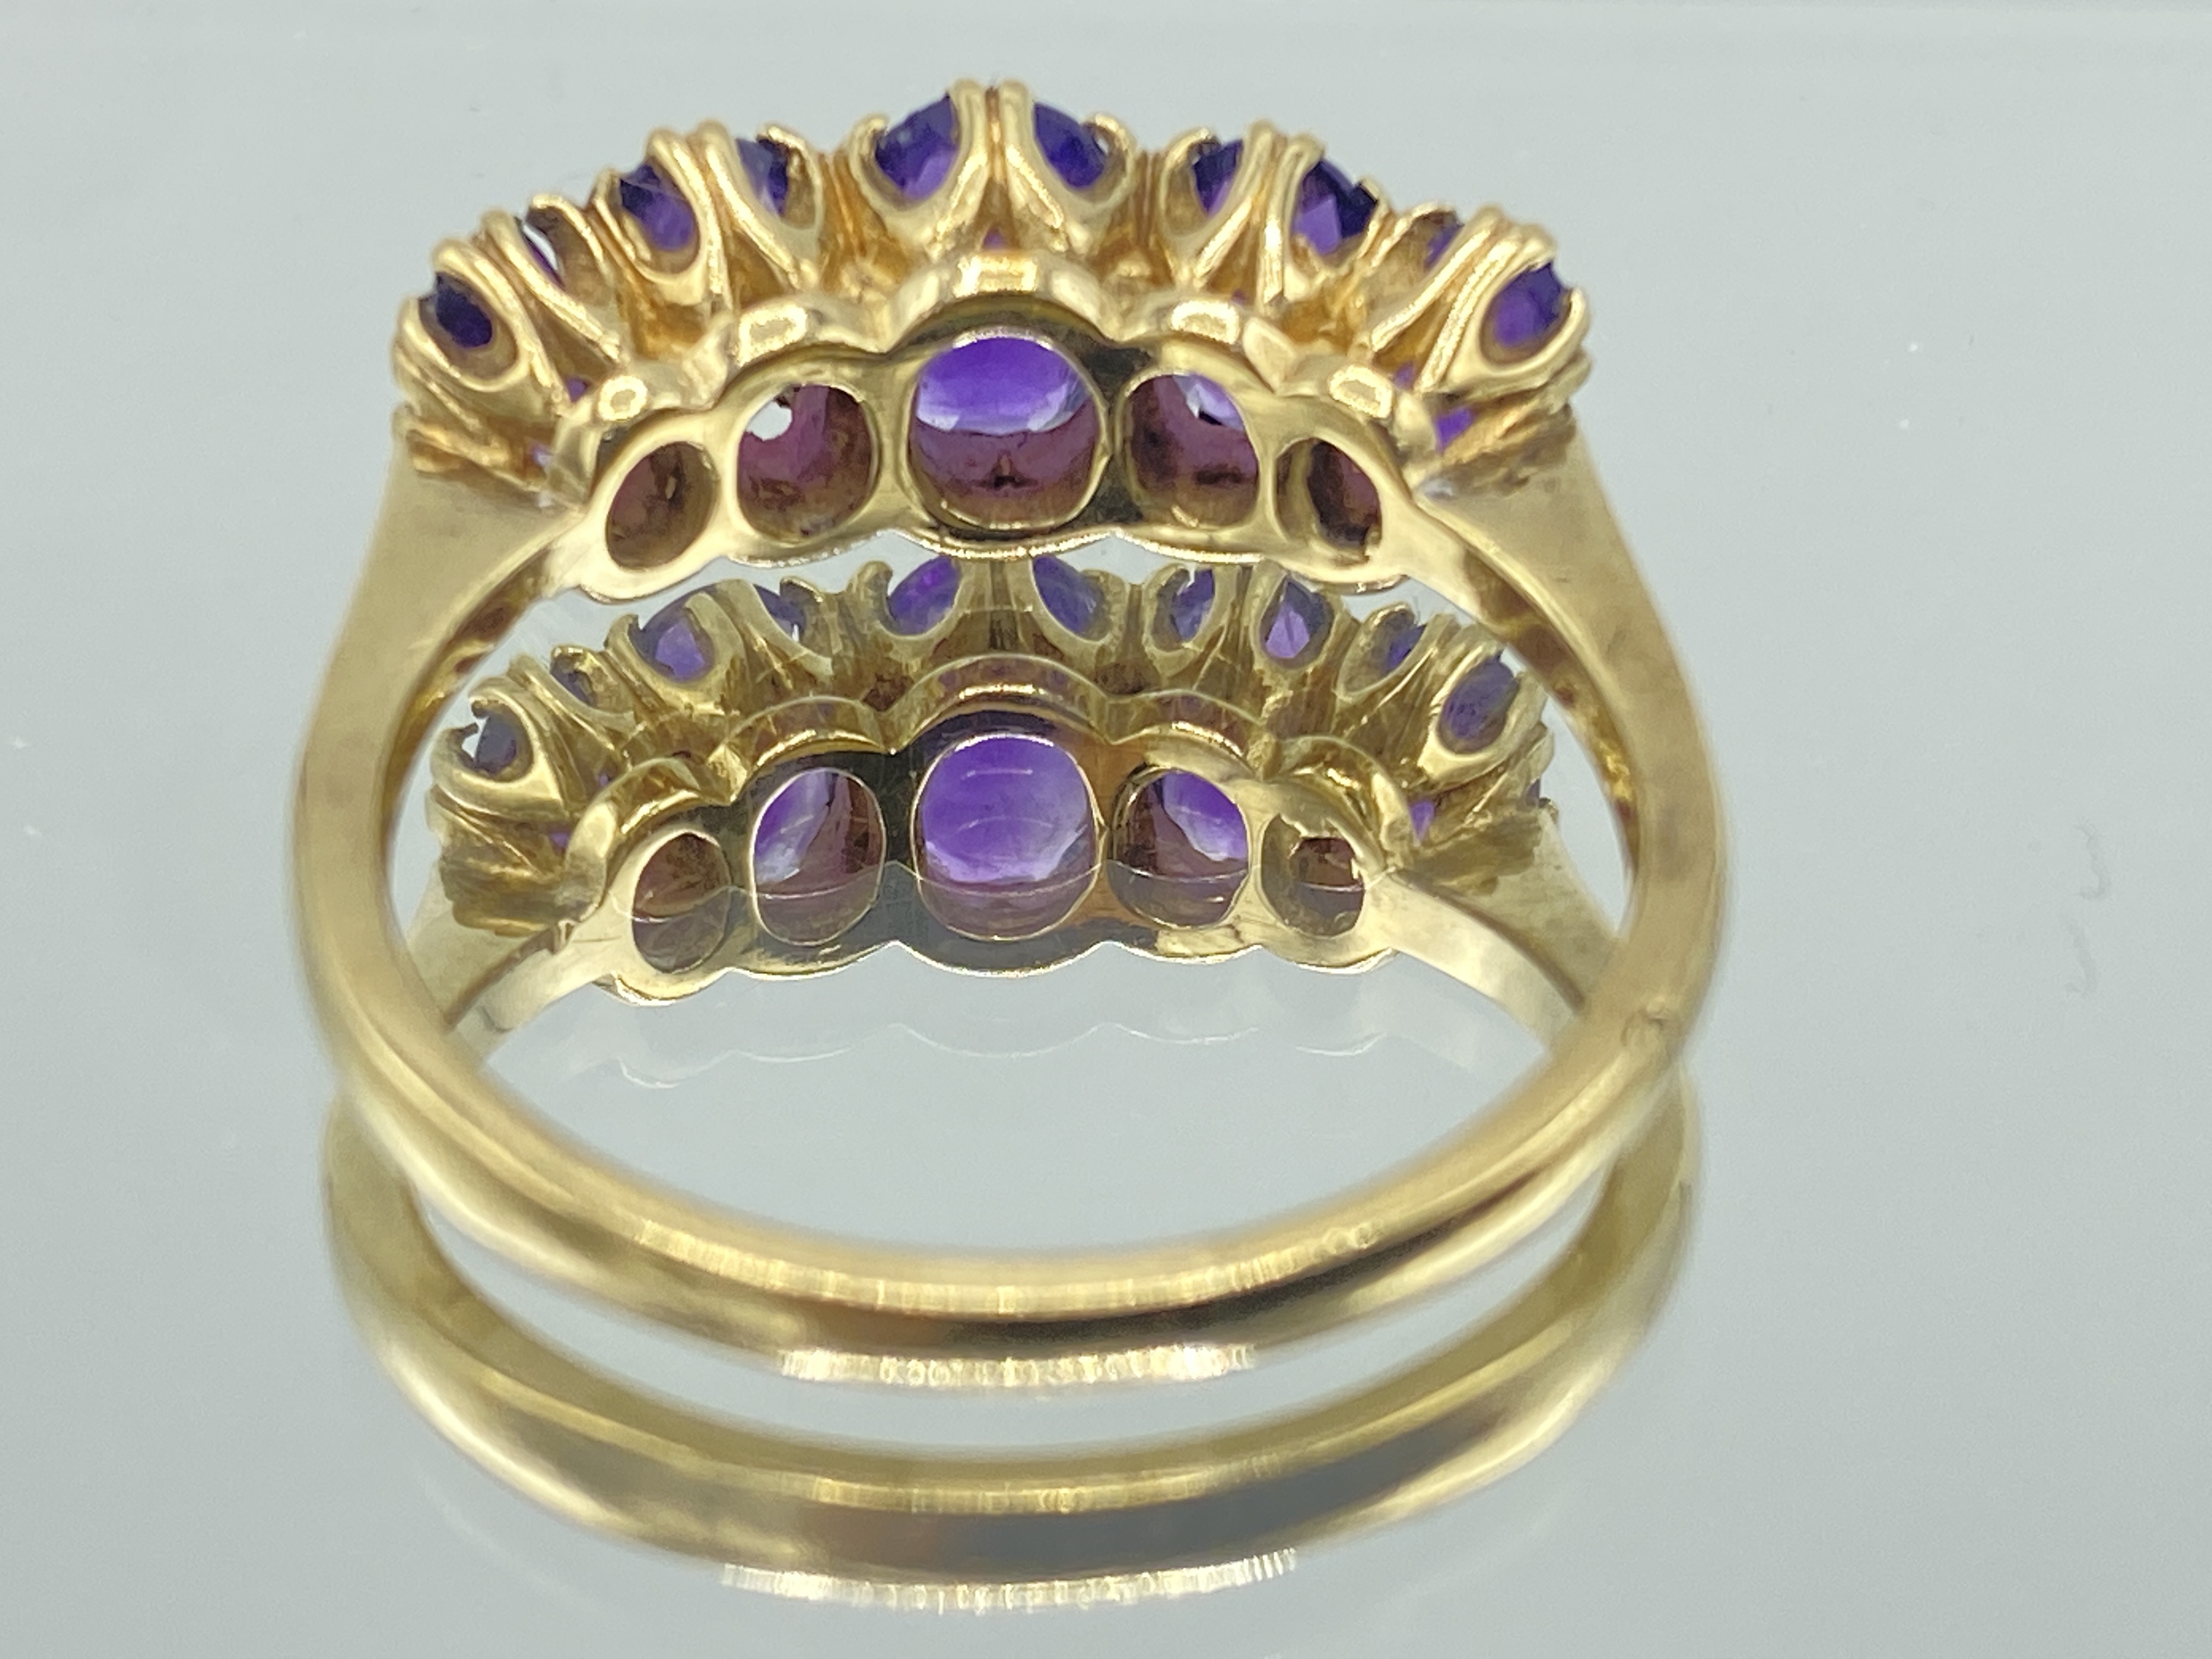 Two 9ct gold and 5 stone rings - Image 7 of 7